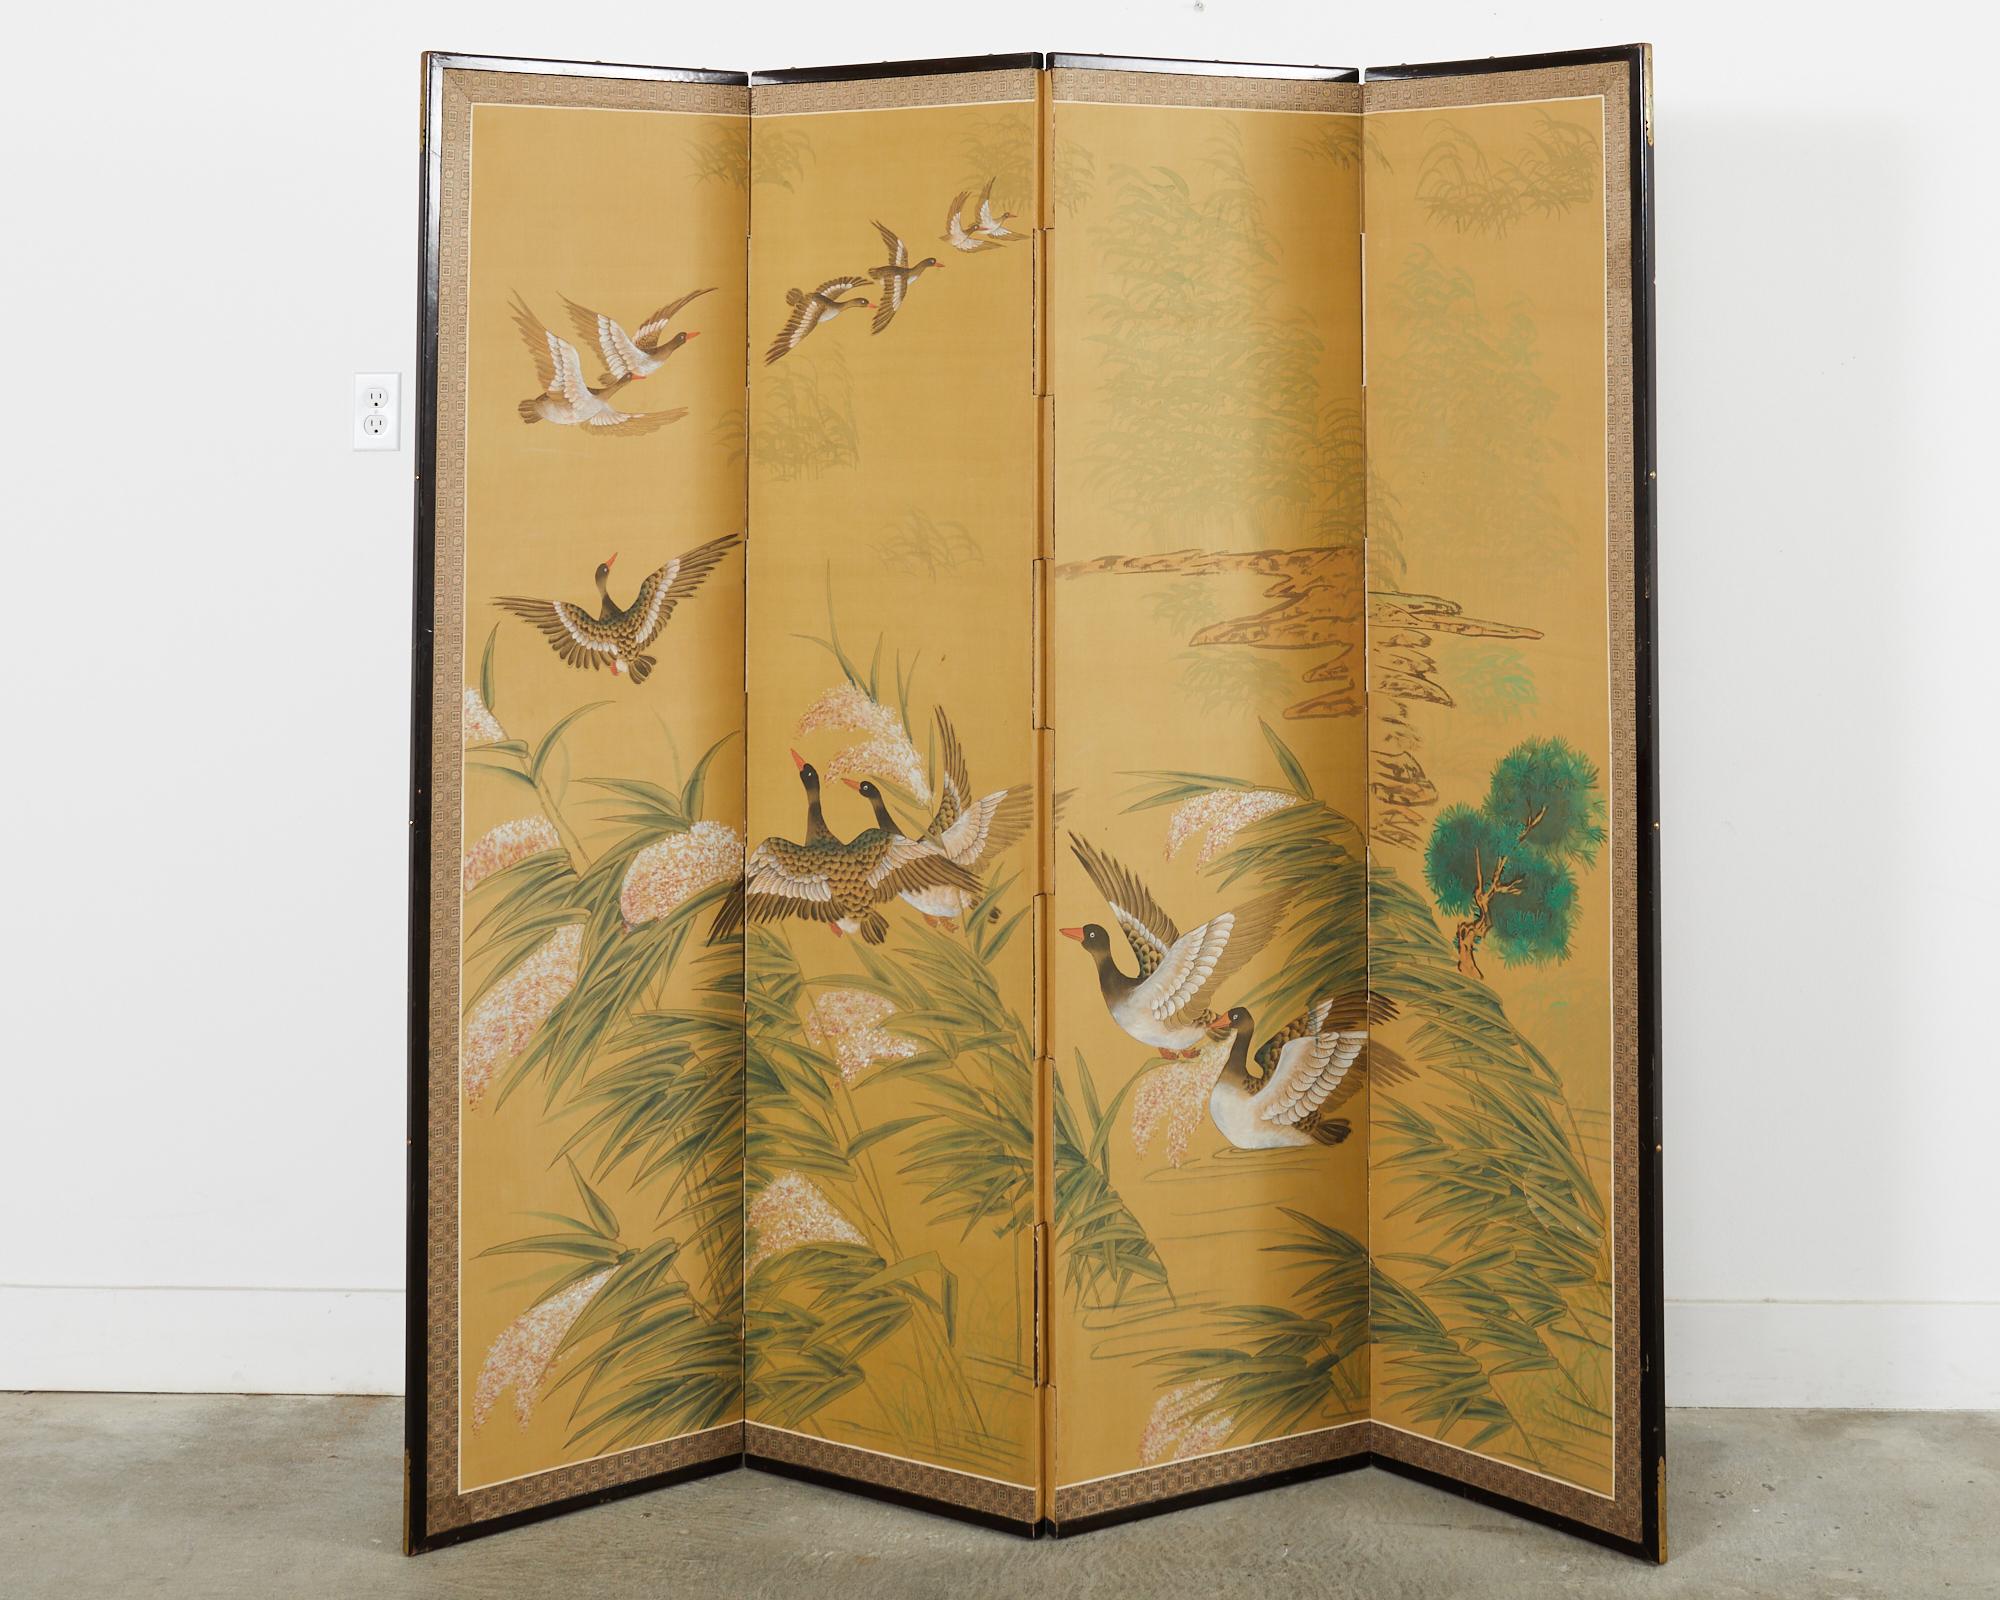 20th Century Japanese Style Four Panel Screen Geese Flight Over Reeds For Sale